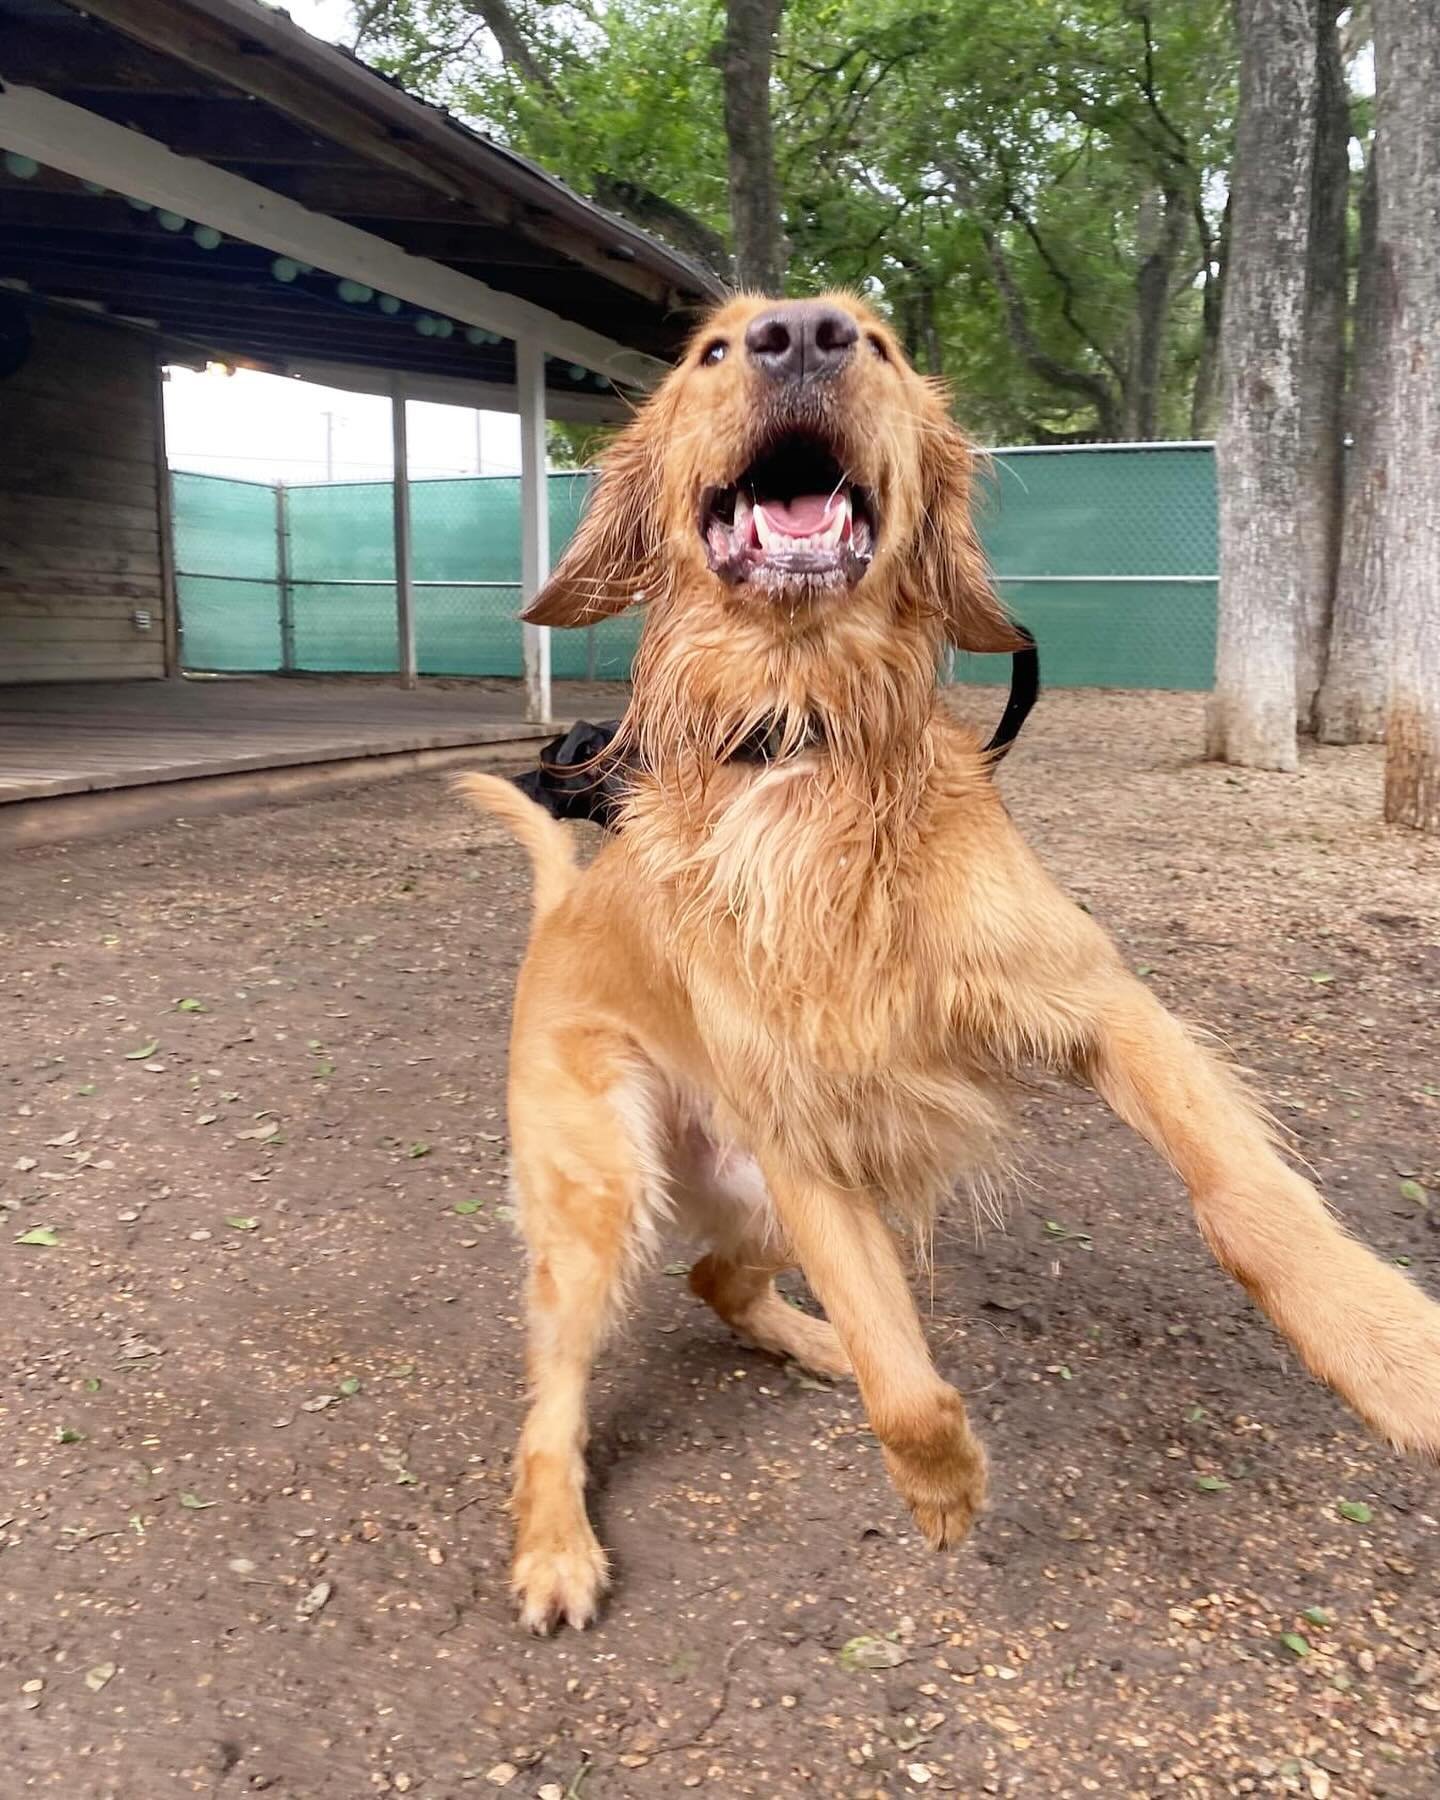 Letting loose and living it up at doggy daycare! 🤪😜
.
.
#pupsandpalsoakhill #pupsandpals #pupsandpalspetlounge #doggydaycare #dogdaycare #dogdaycareaustin #dogdaycarefun #dogdaycarelife #doggydaycareandboarding